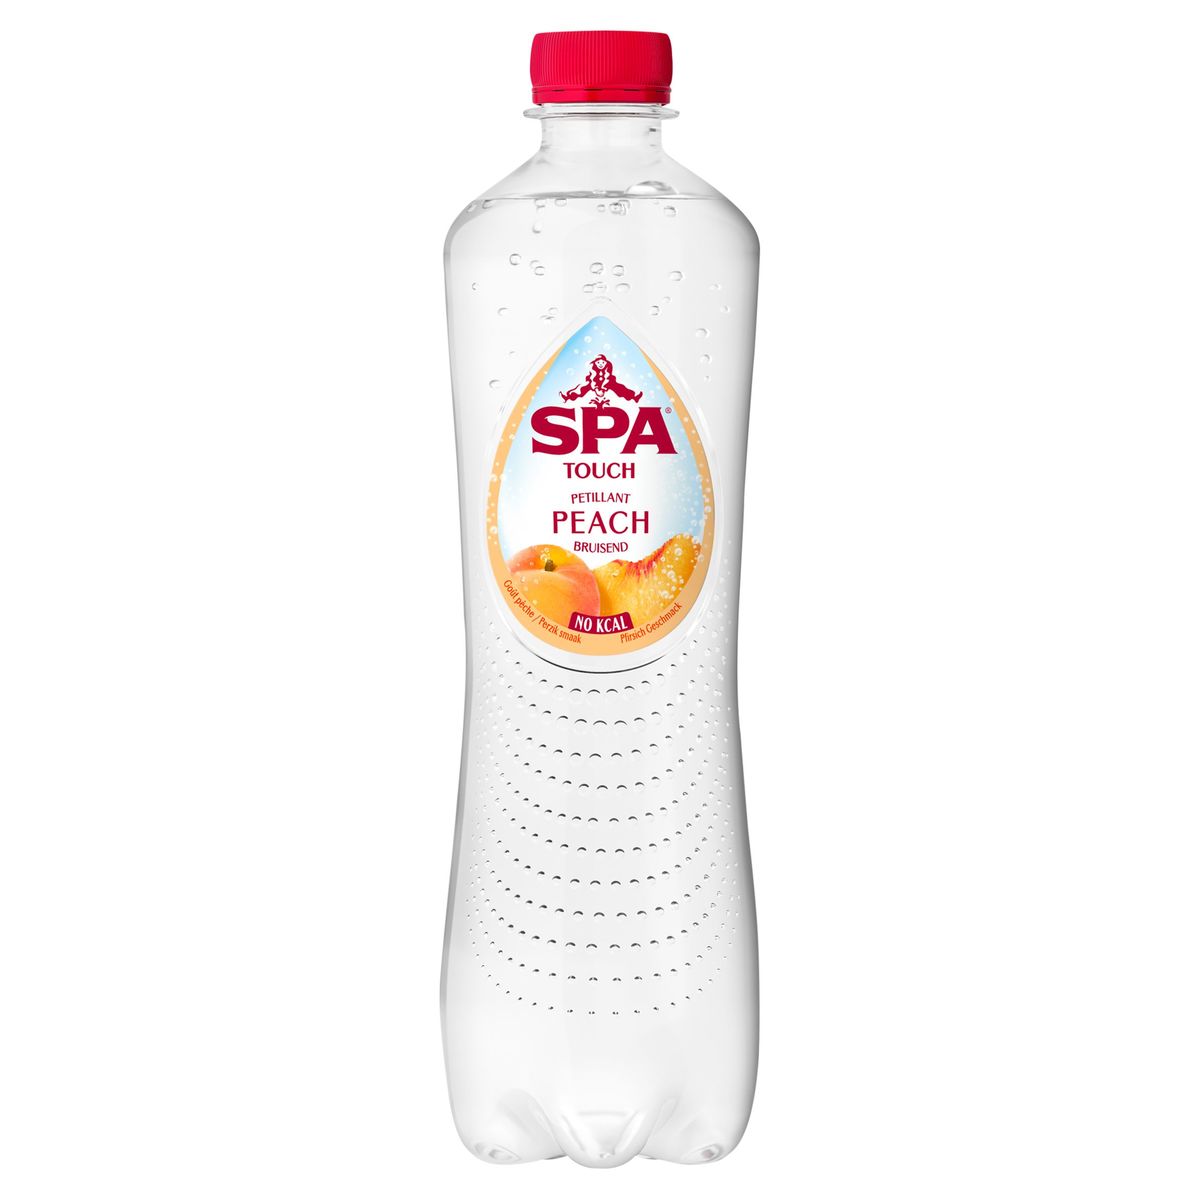 SPA TOUCH Bruisend Mineraalwater perzik 50 cl